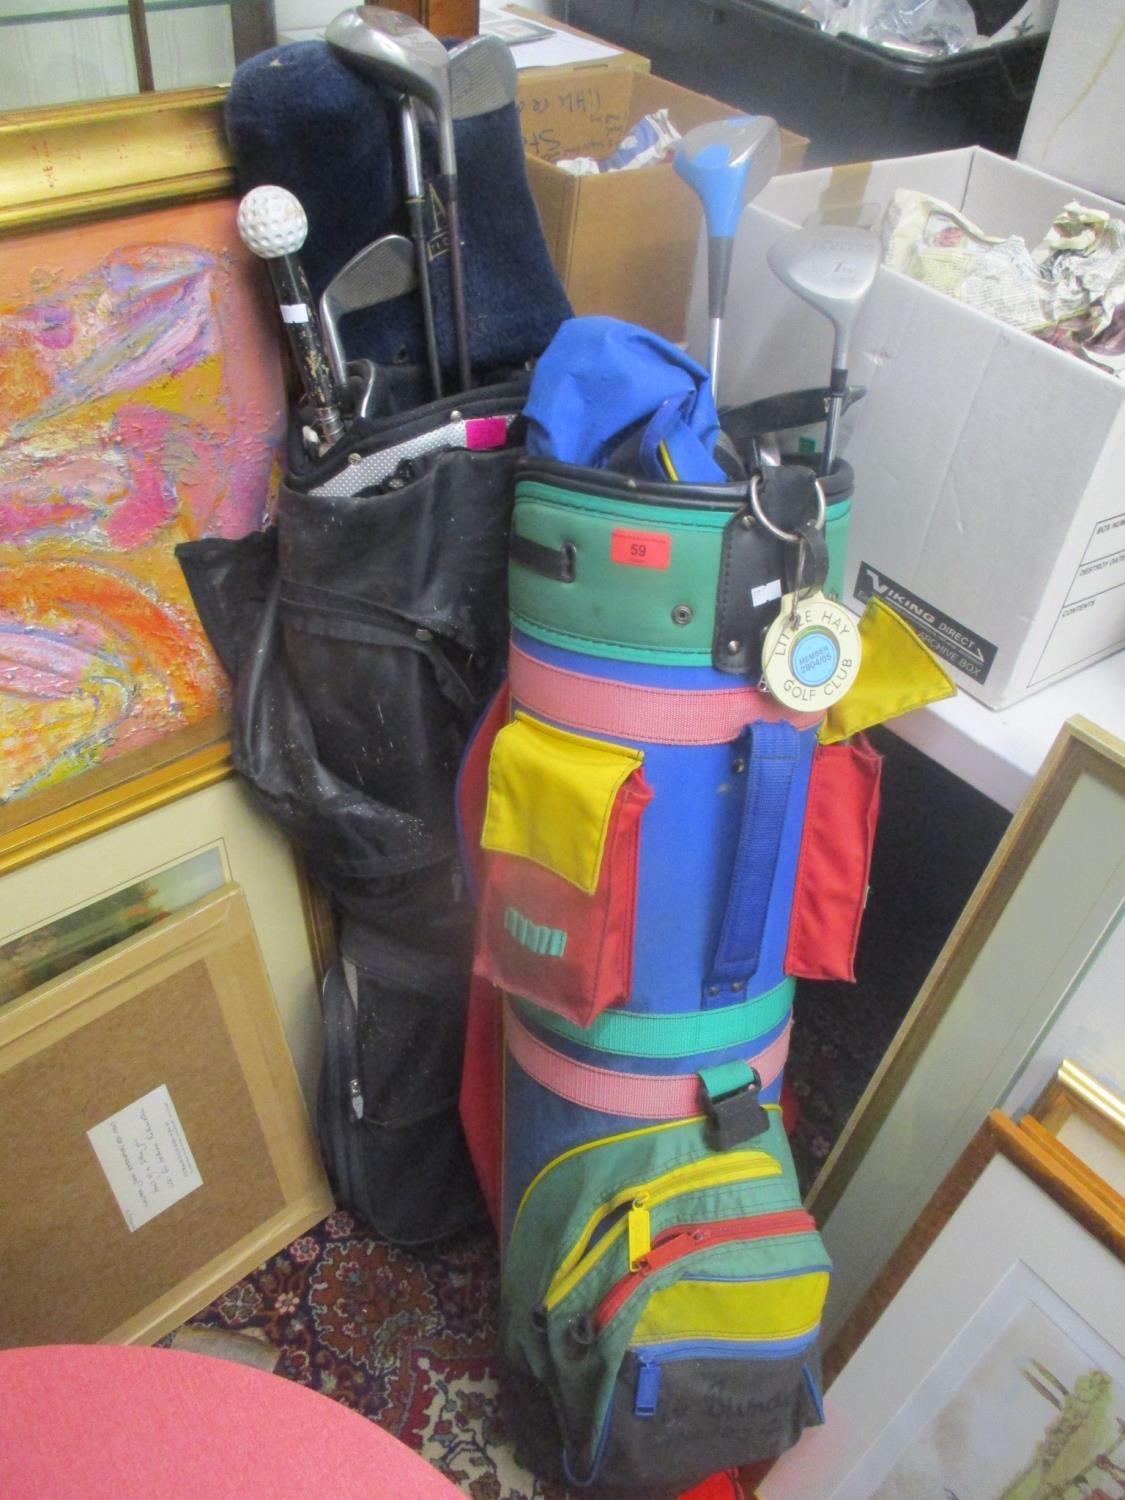 Two golf bags containing mixed golf irons